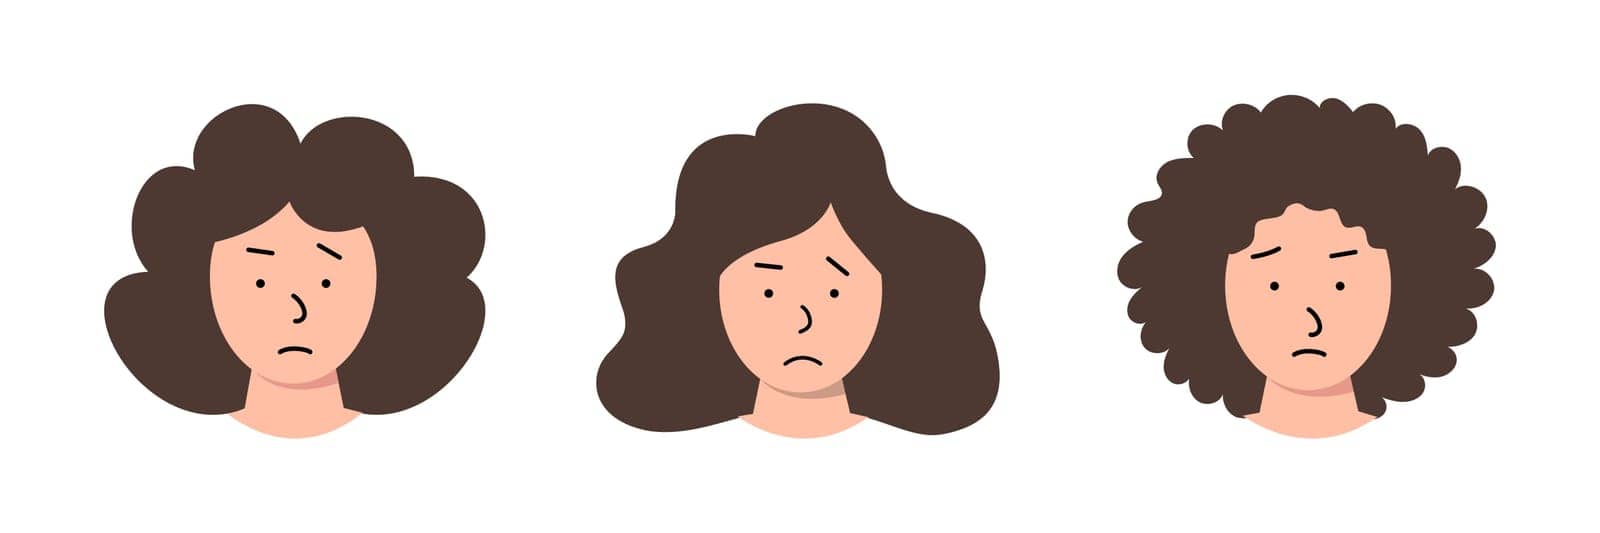 Set of faces of people with sad emotion. Different types of human heads by MakeVector